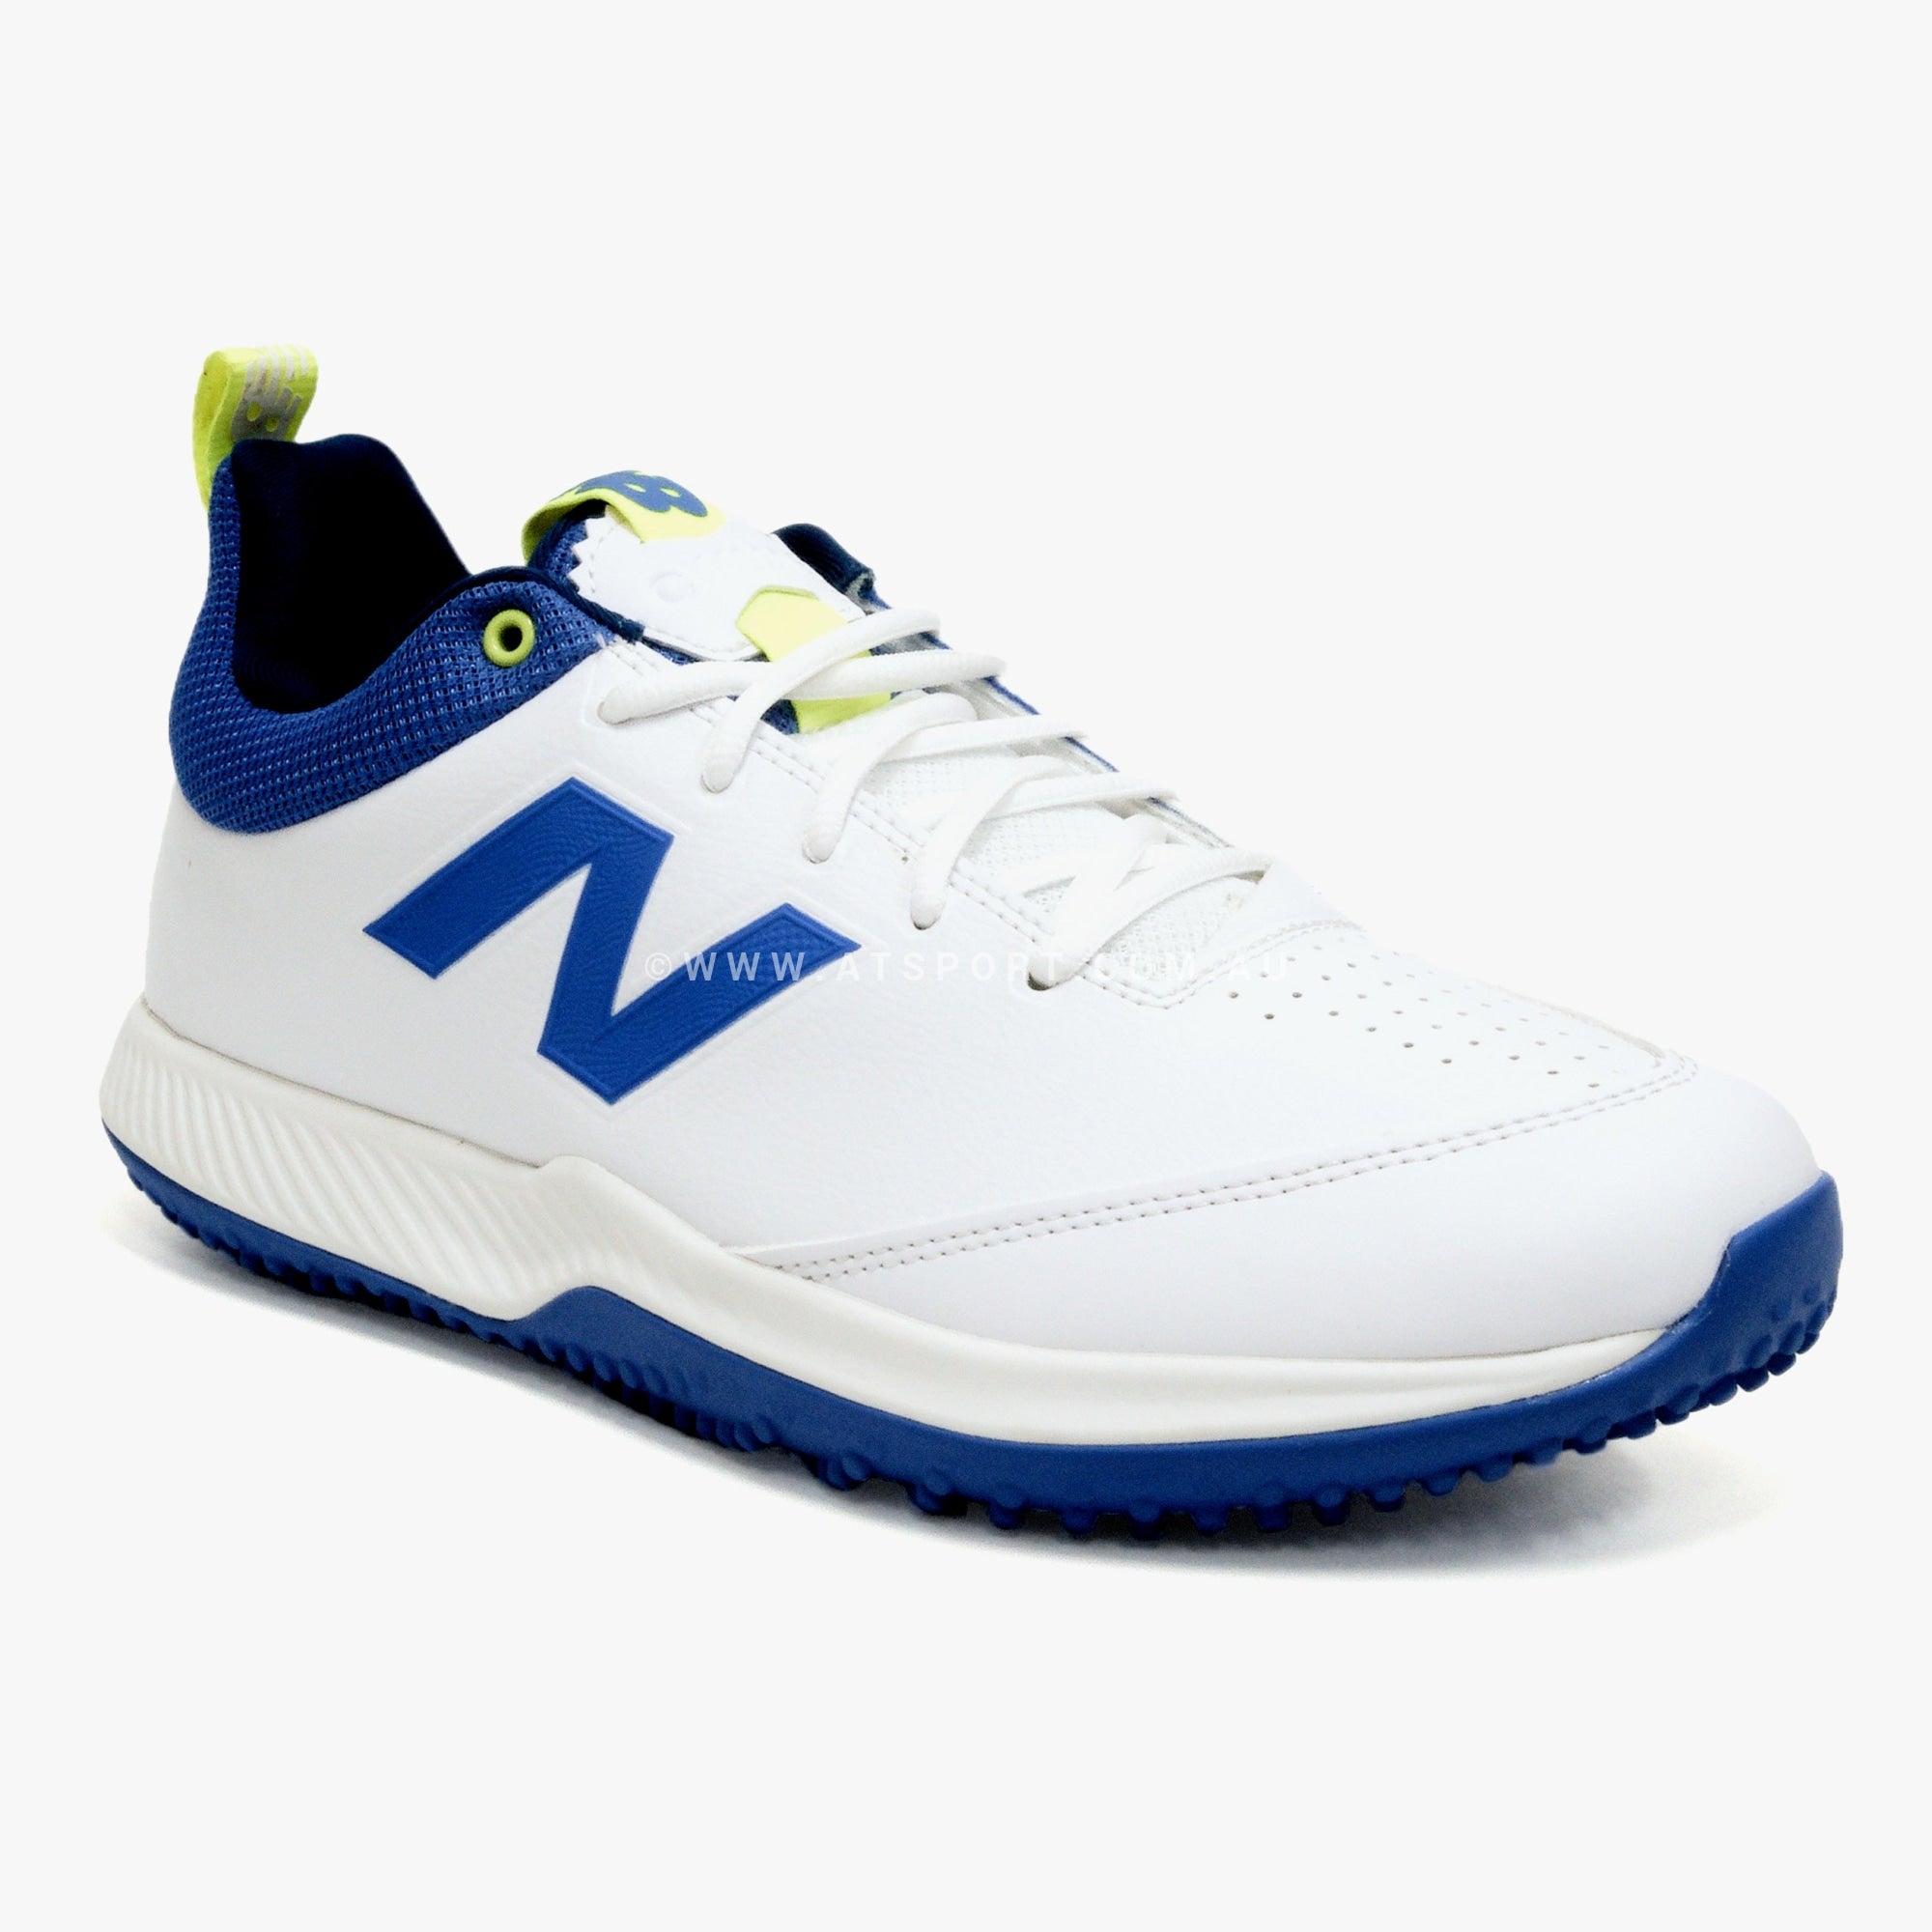 New Balance Ck4020 V5 Rubber Cricket Shoes / Rubbers